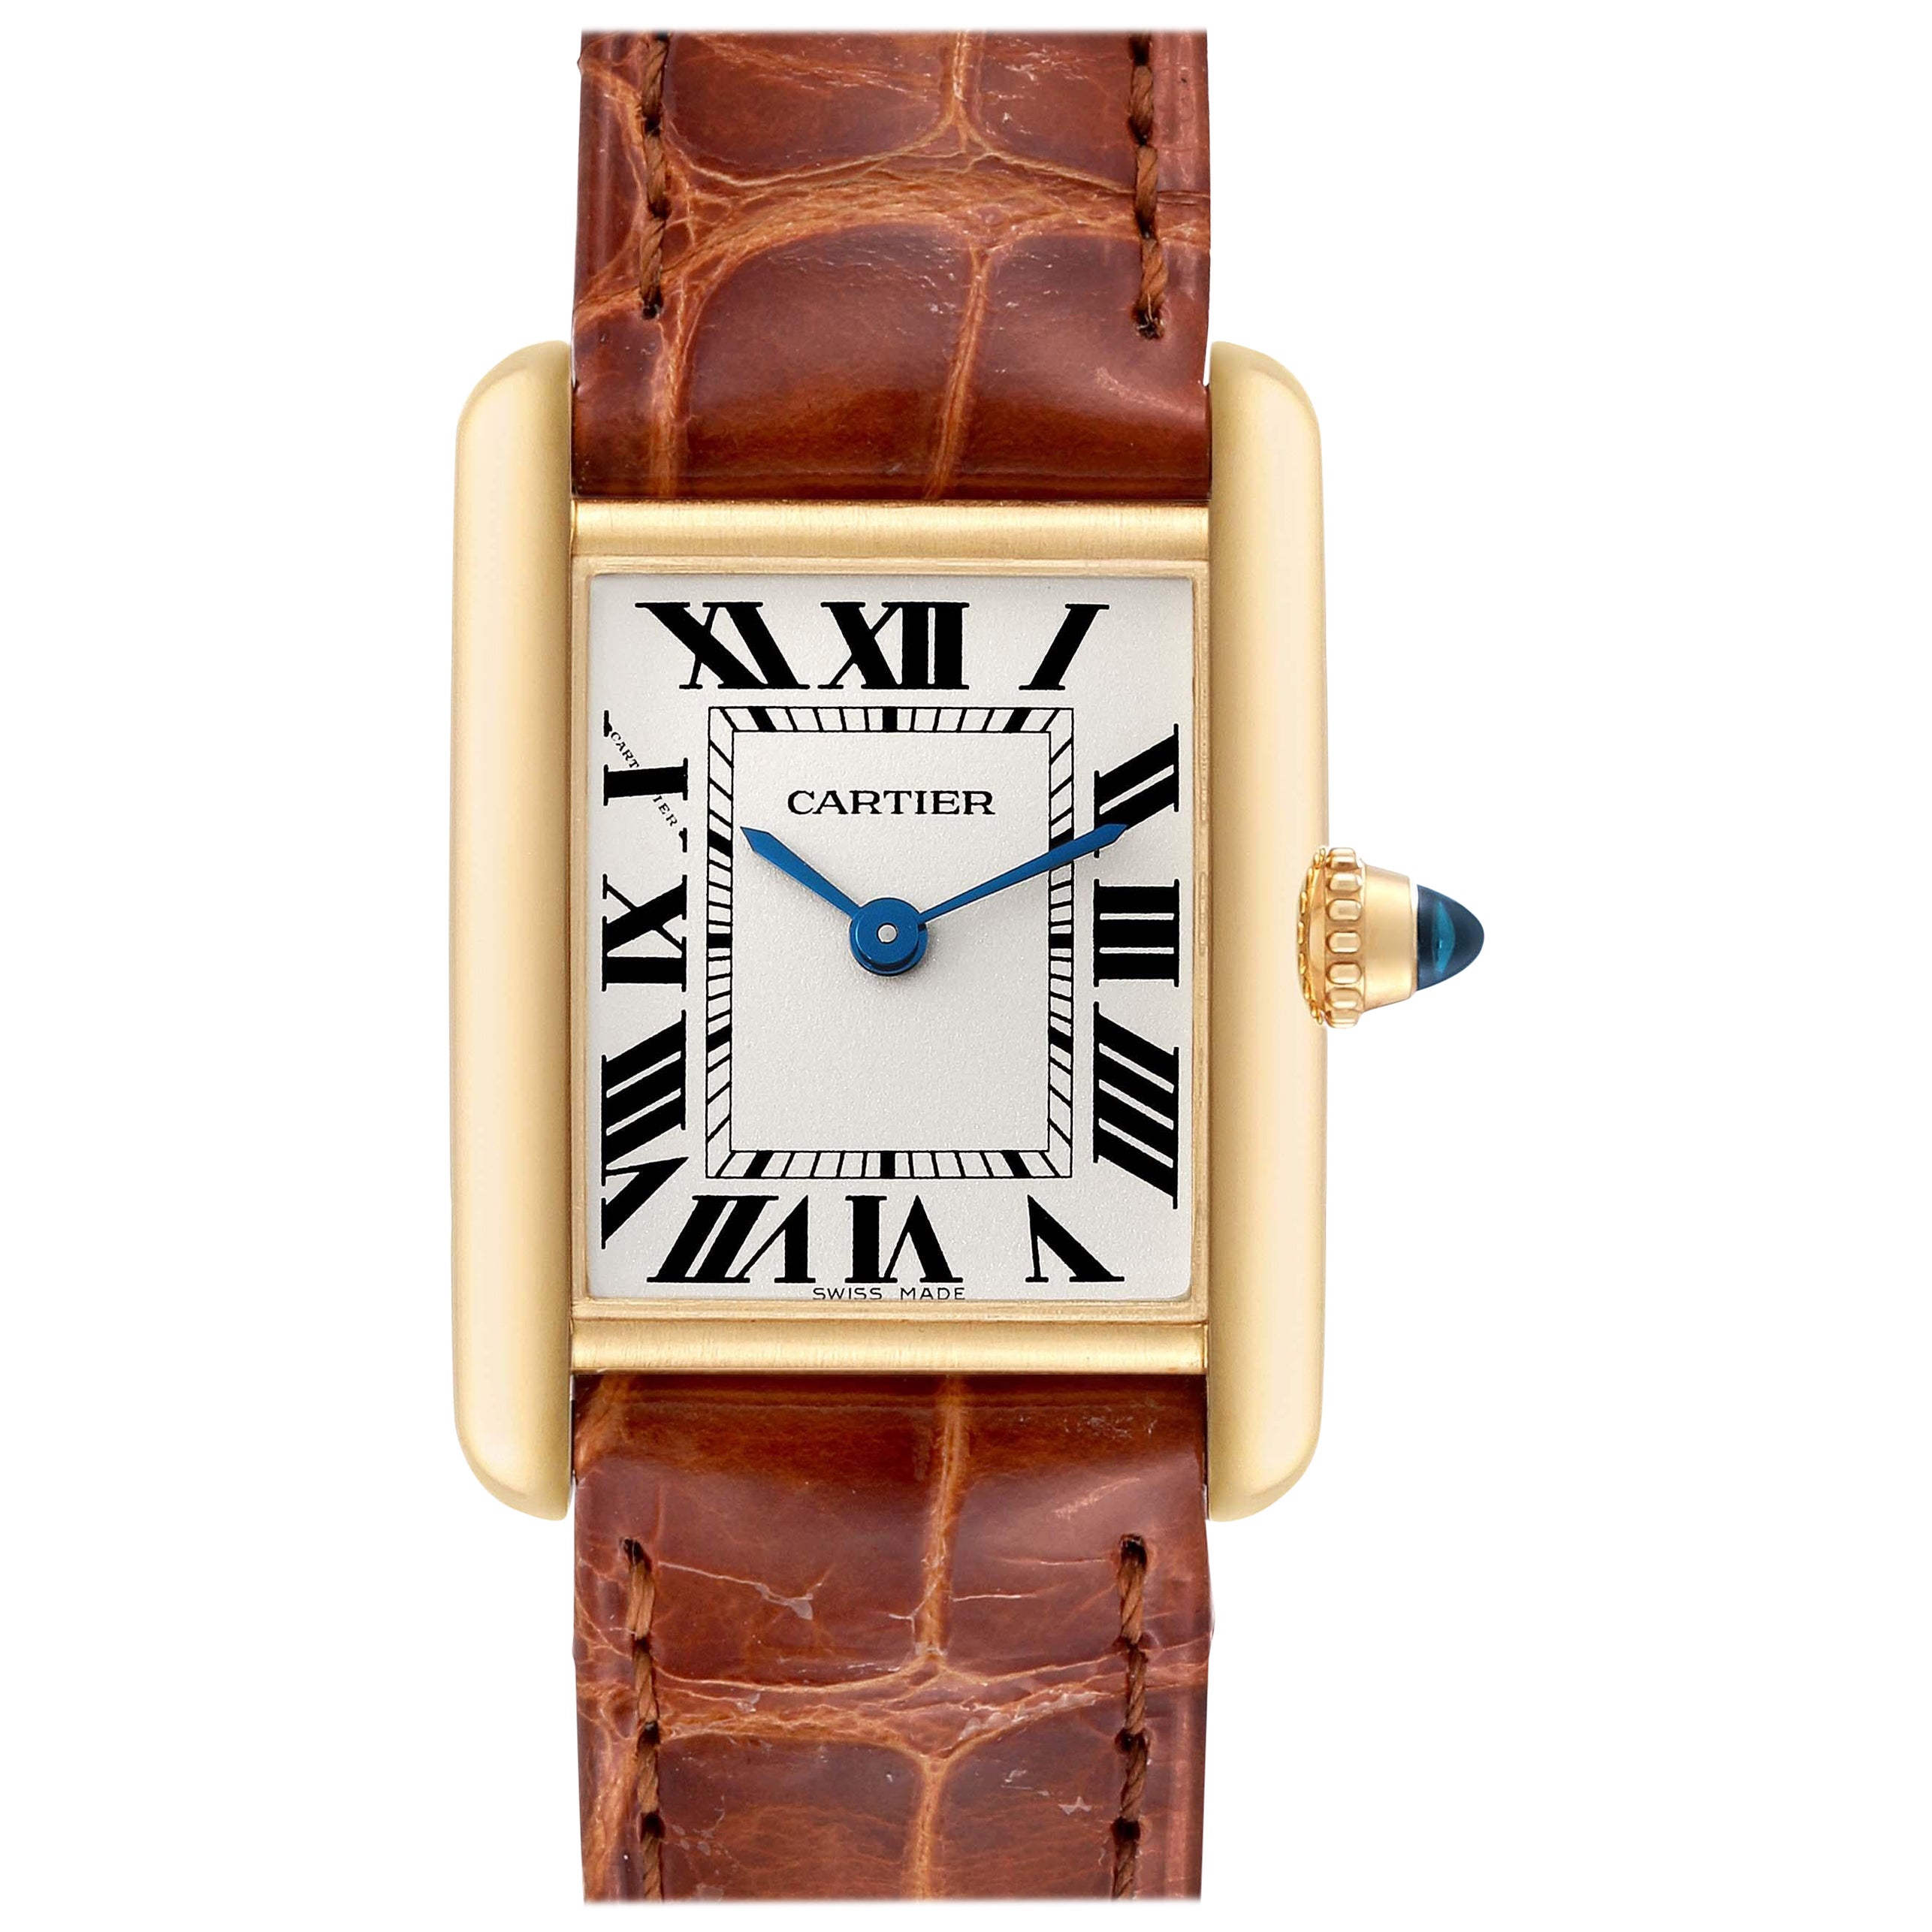 Cartier Tank Louis Small Yellow Gold Brown Strap Ladies Watch W1529856 Box Card